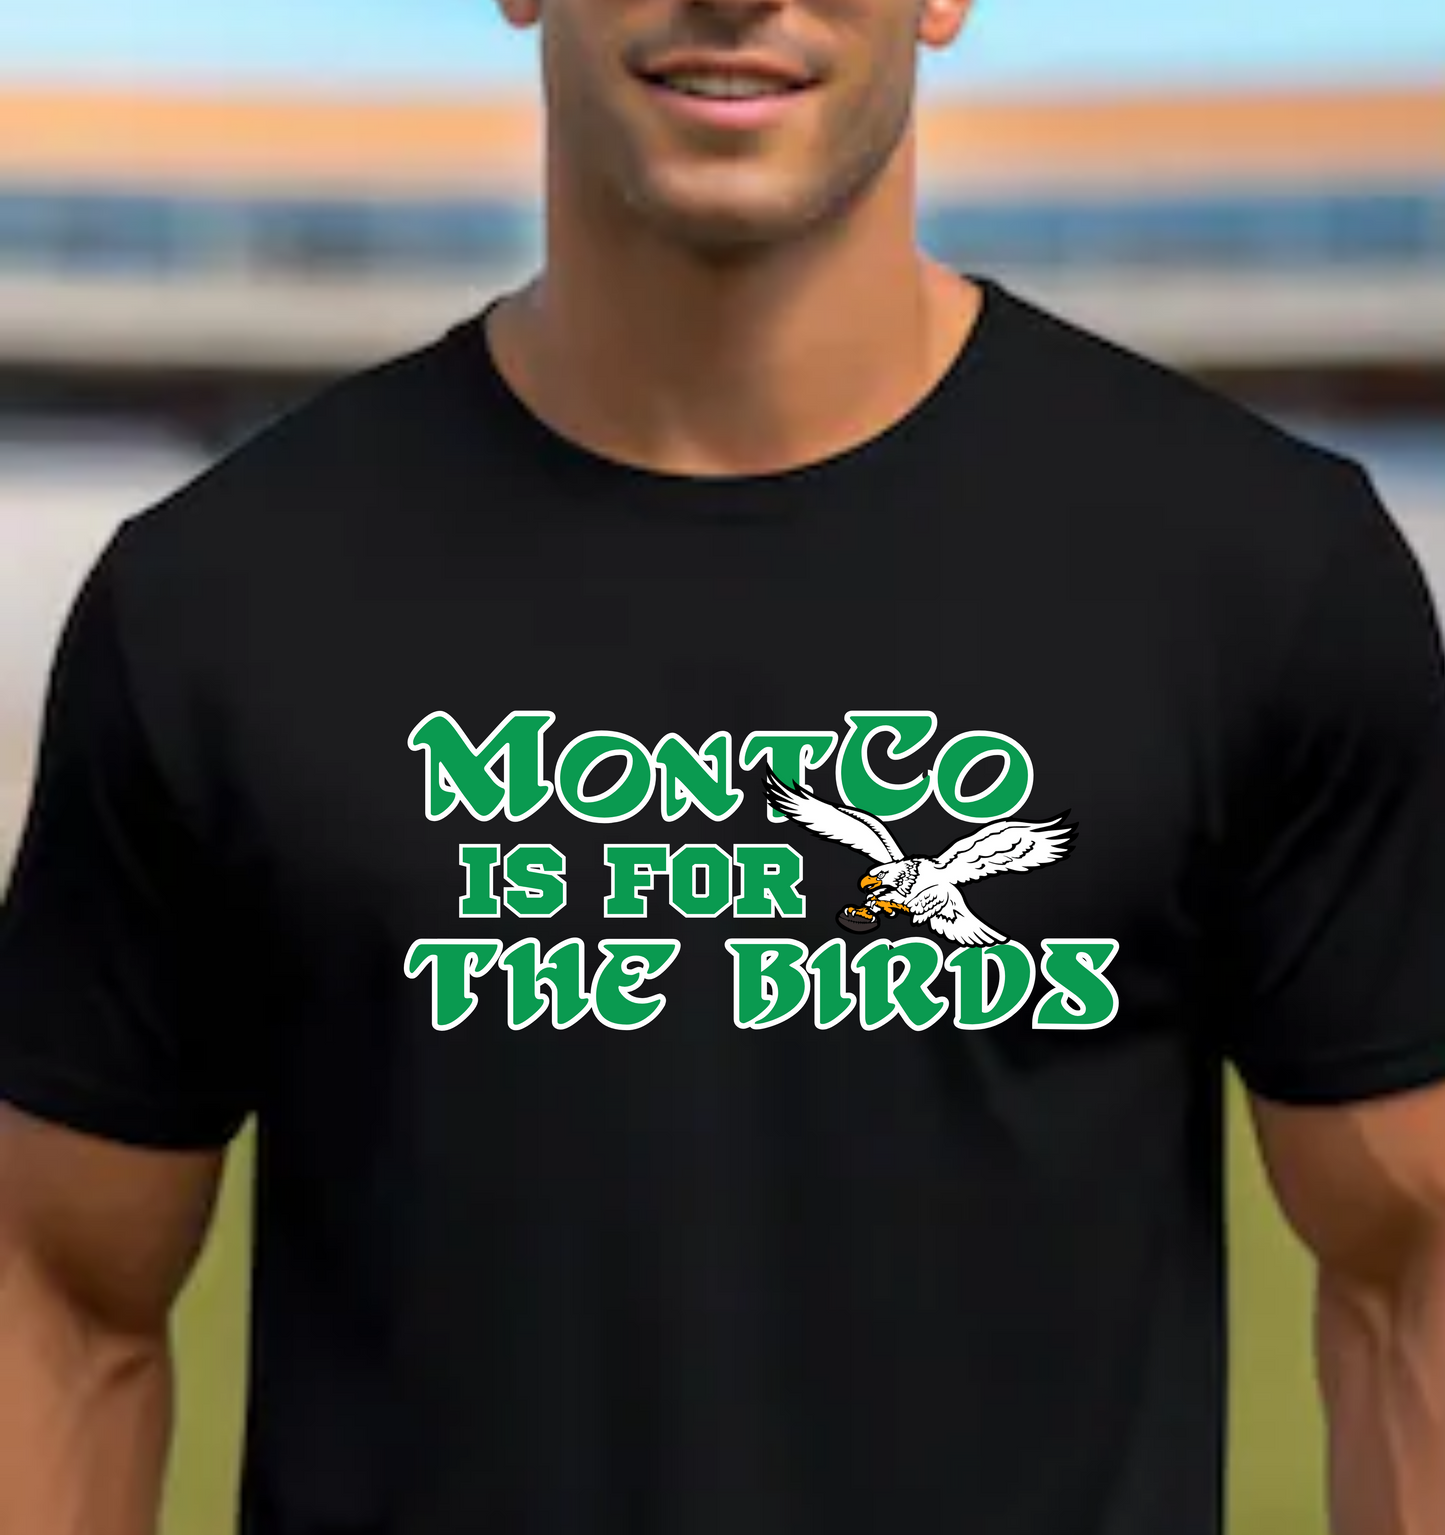 Eagles MontCo is for the Birds tee